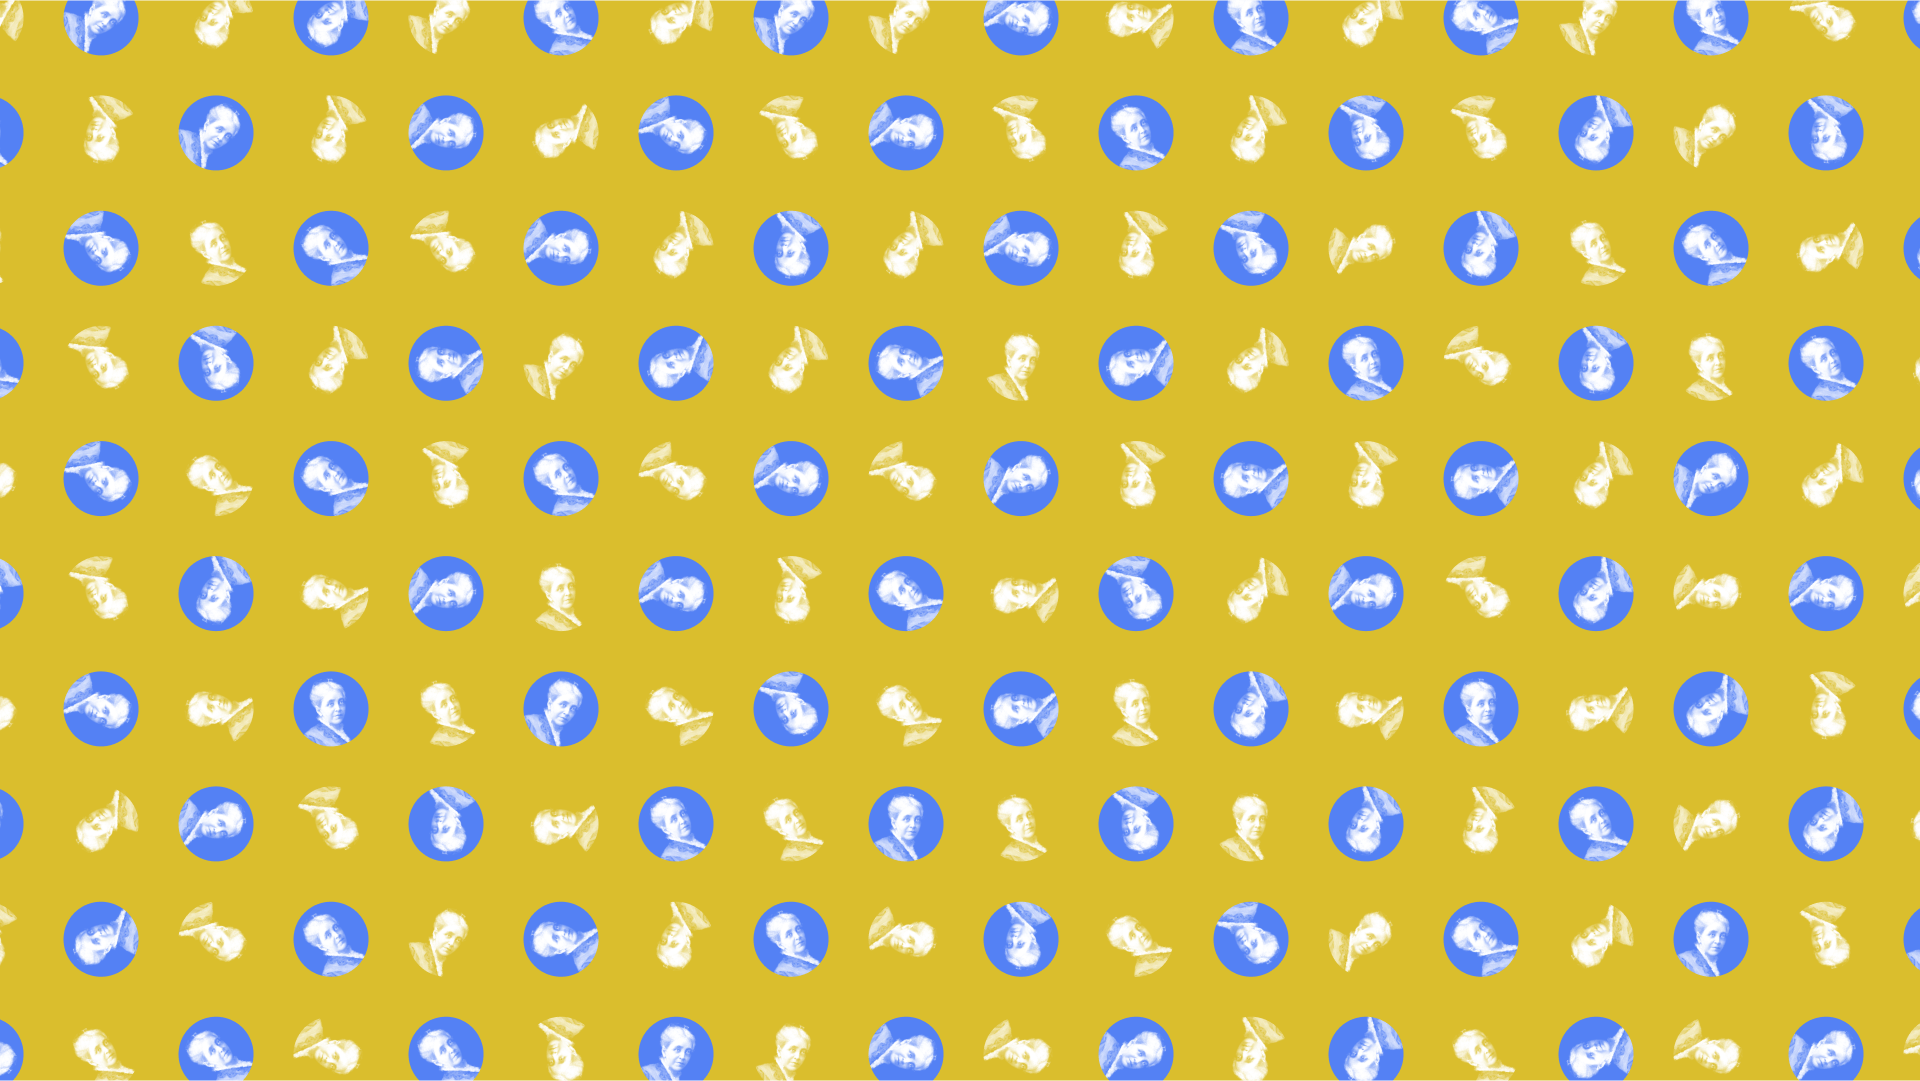 Zoom image - yellow + blue helens